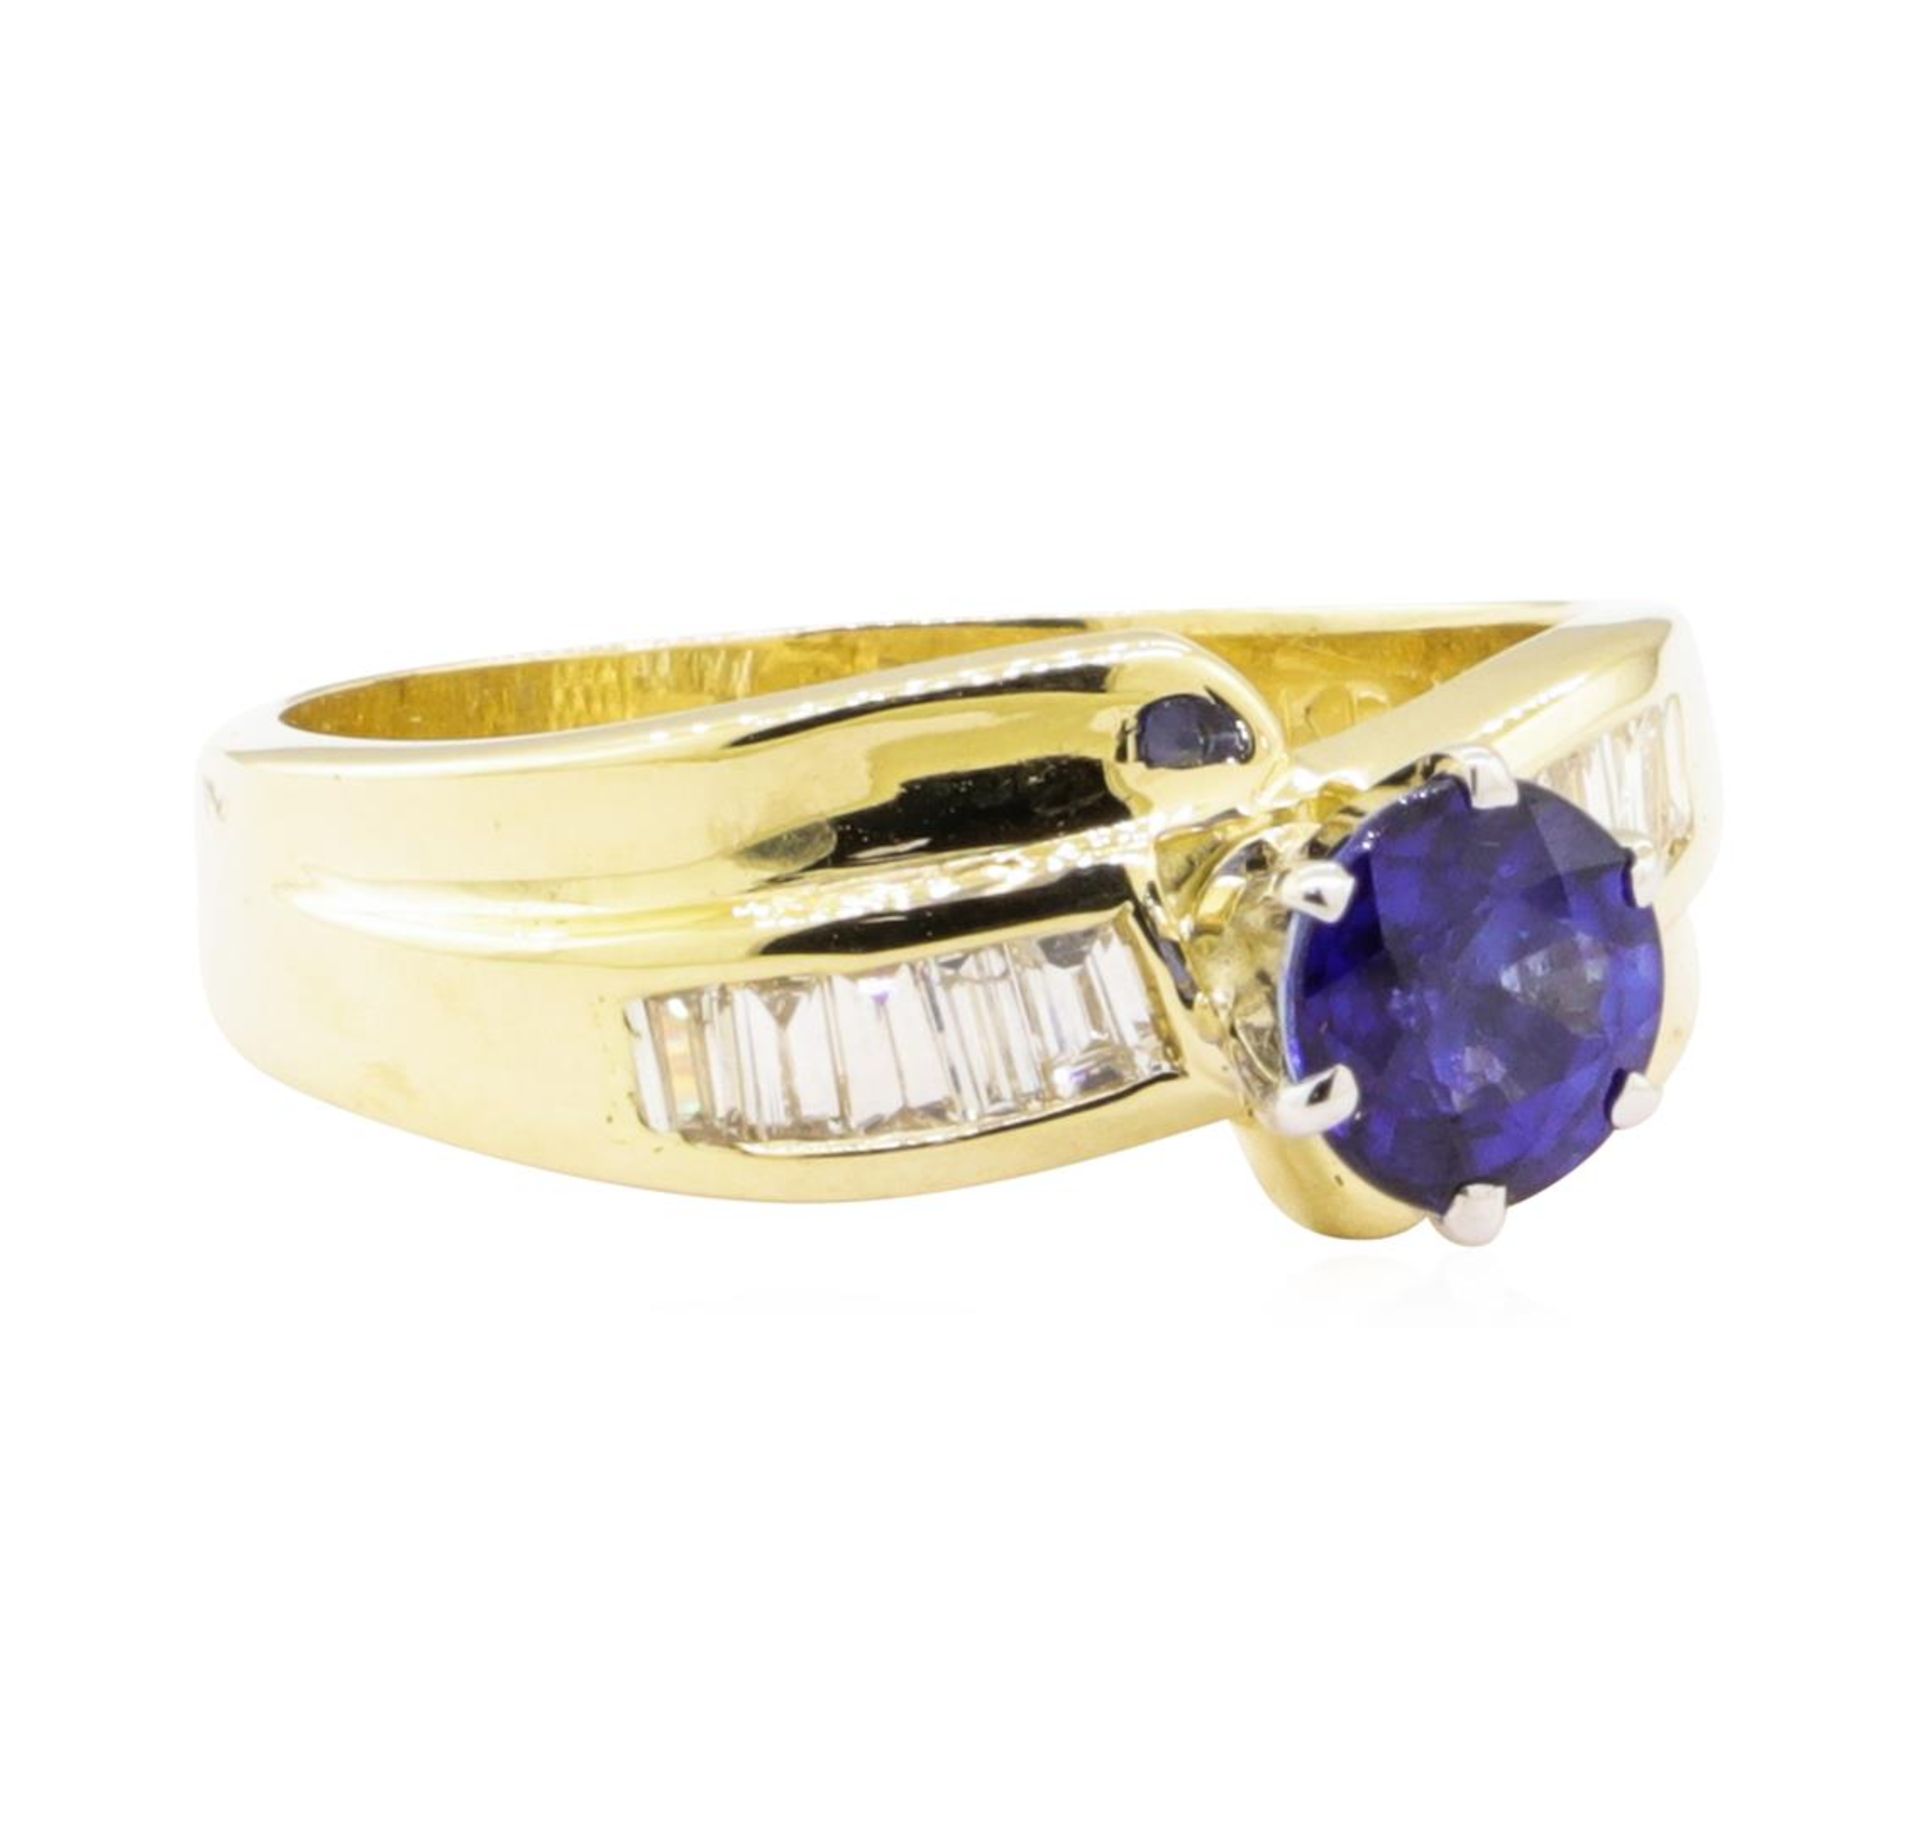 1.32ctw Blue Sapphire and Diamond Ring - 14KT Yellow Gold